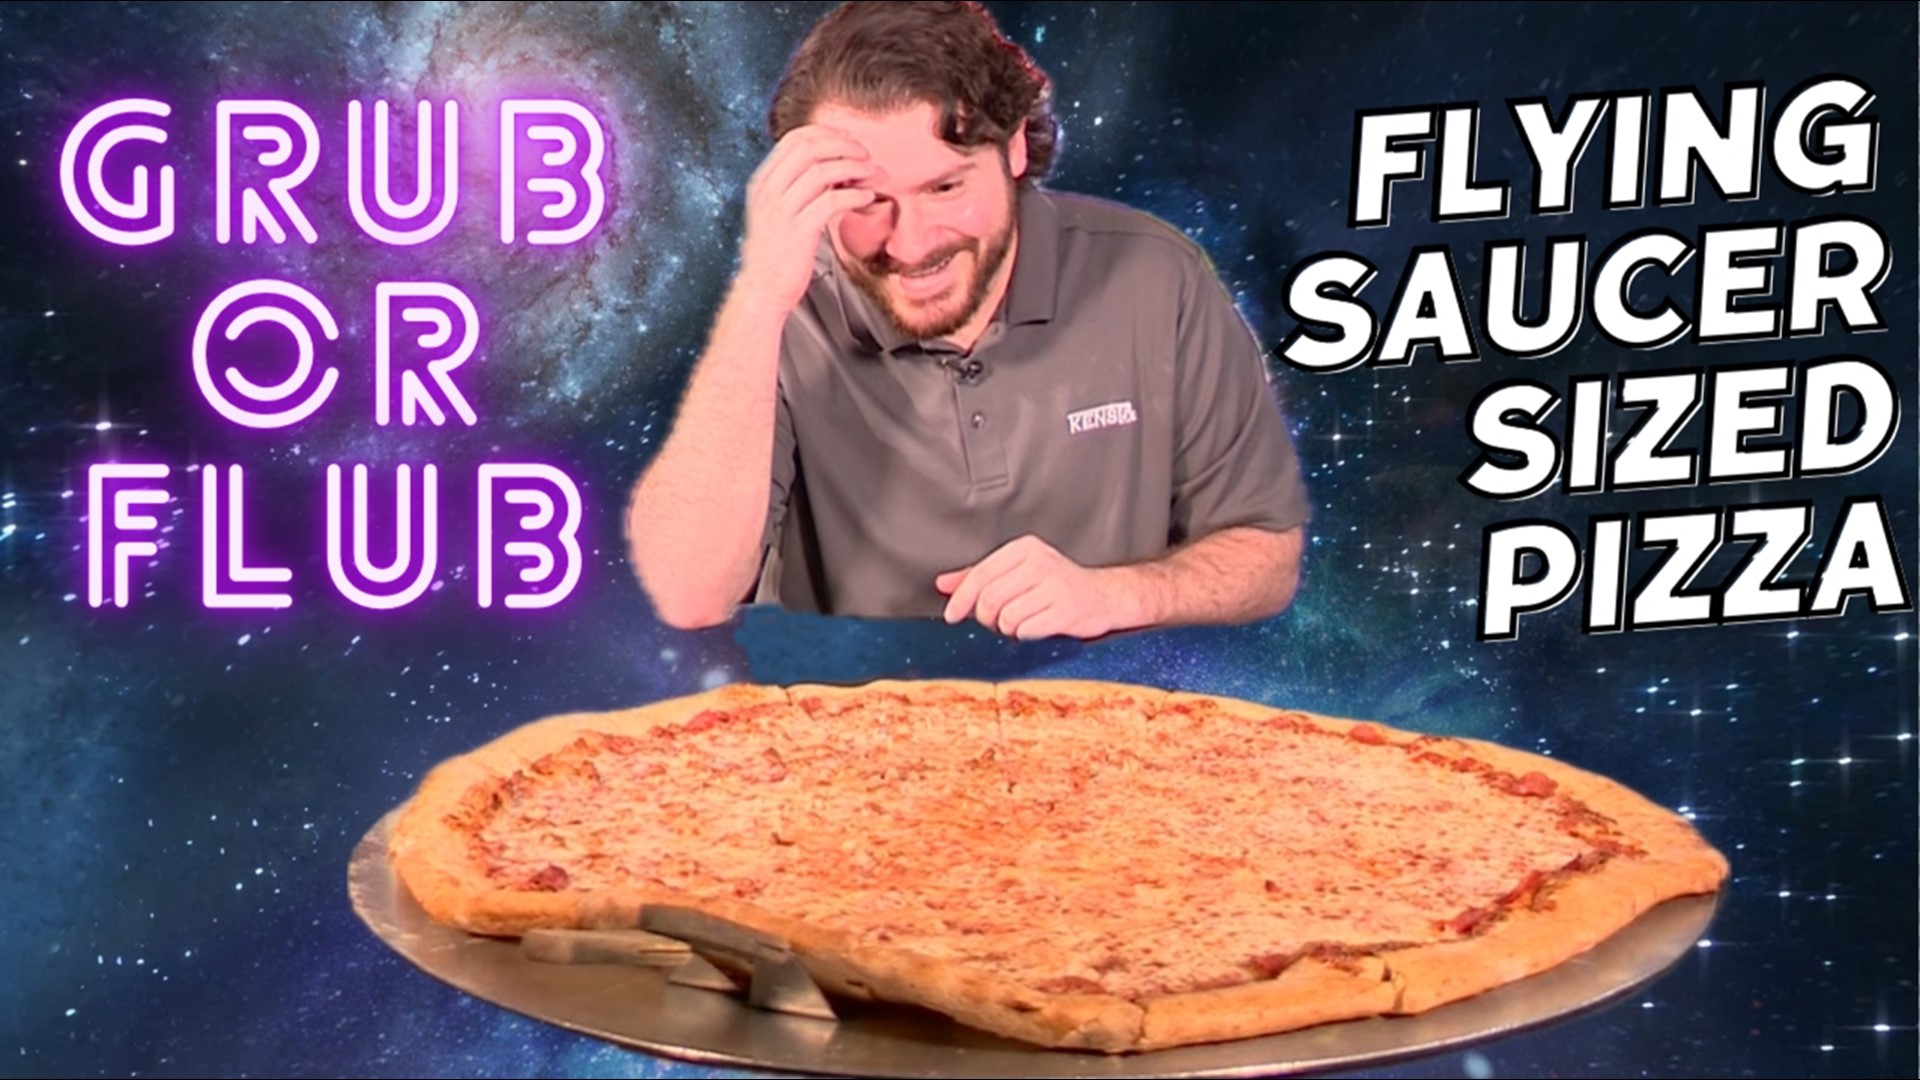 MAARS Pizza is a family-owned business that serves a giant 28-inch pizza that only one group of three has ever completed. Luke takes it on by himself, or does he?